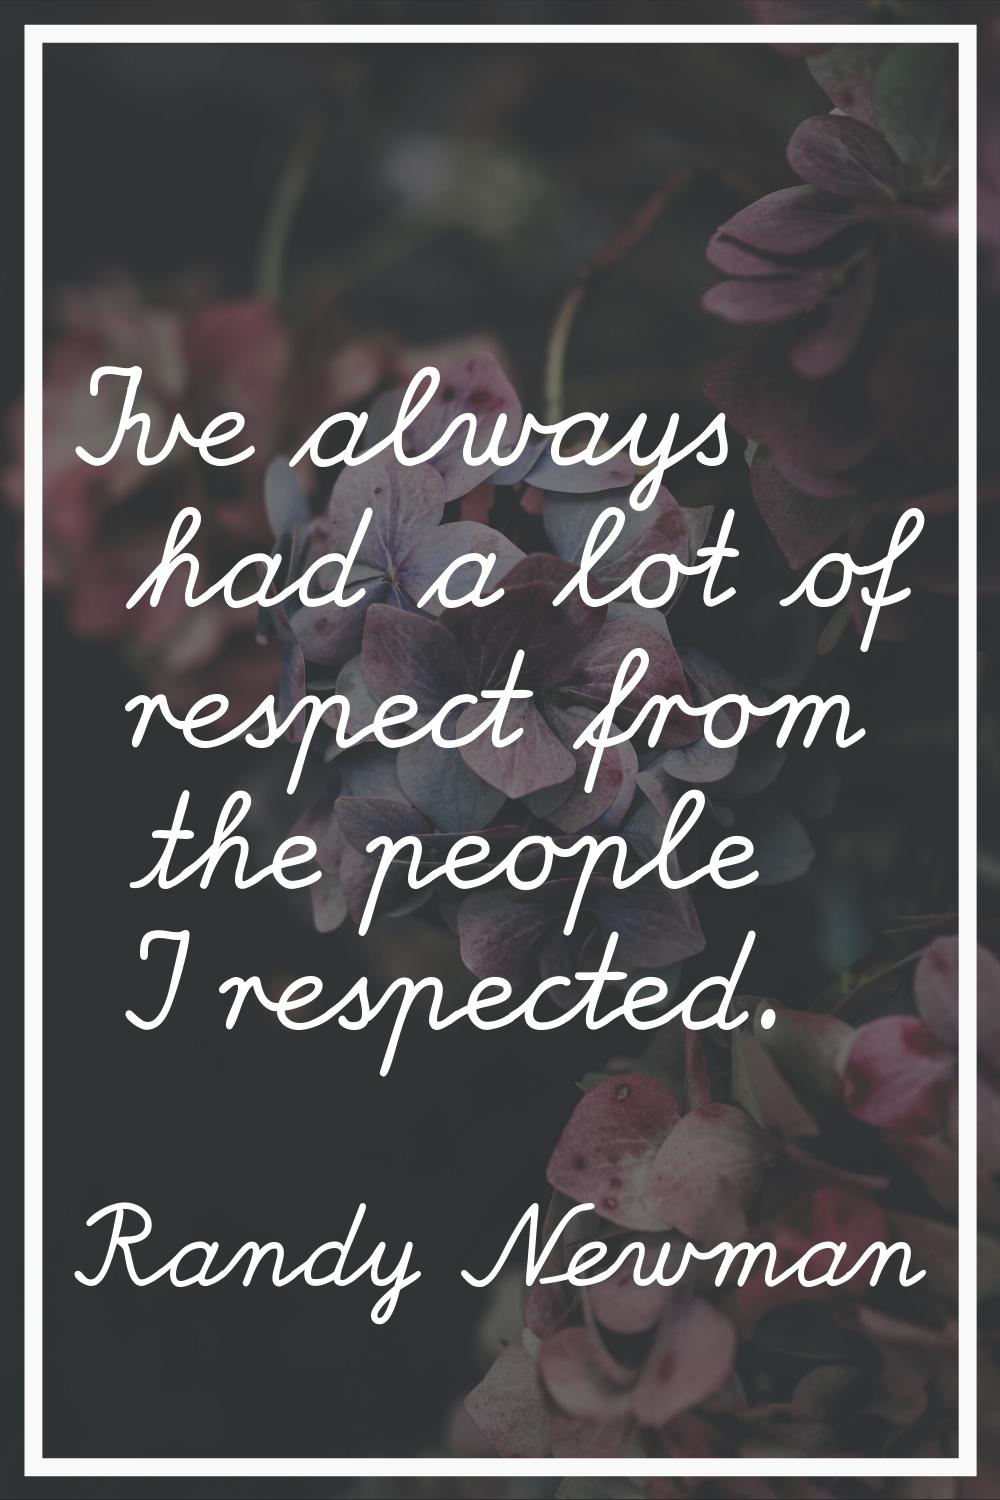 I've always had a lot of respect from the people I respected.